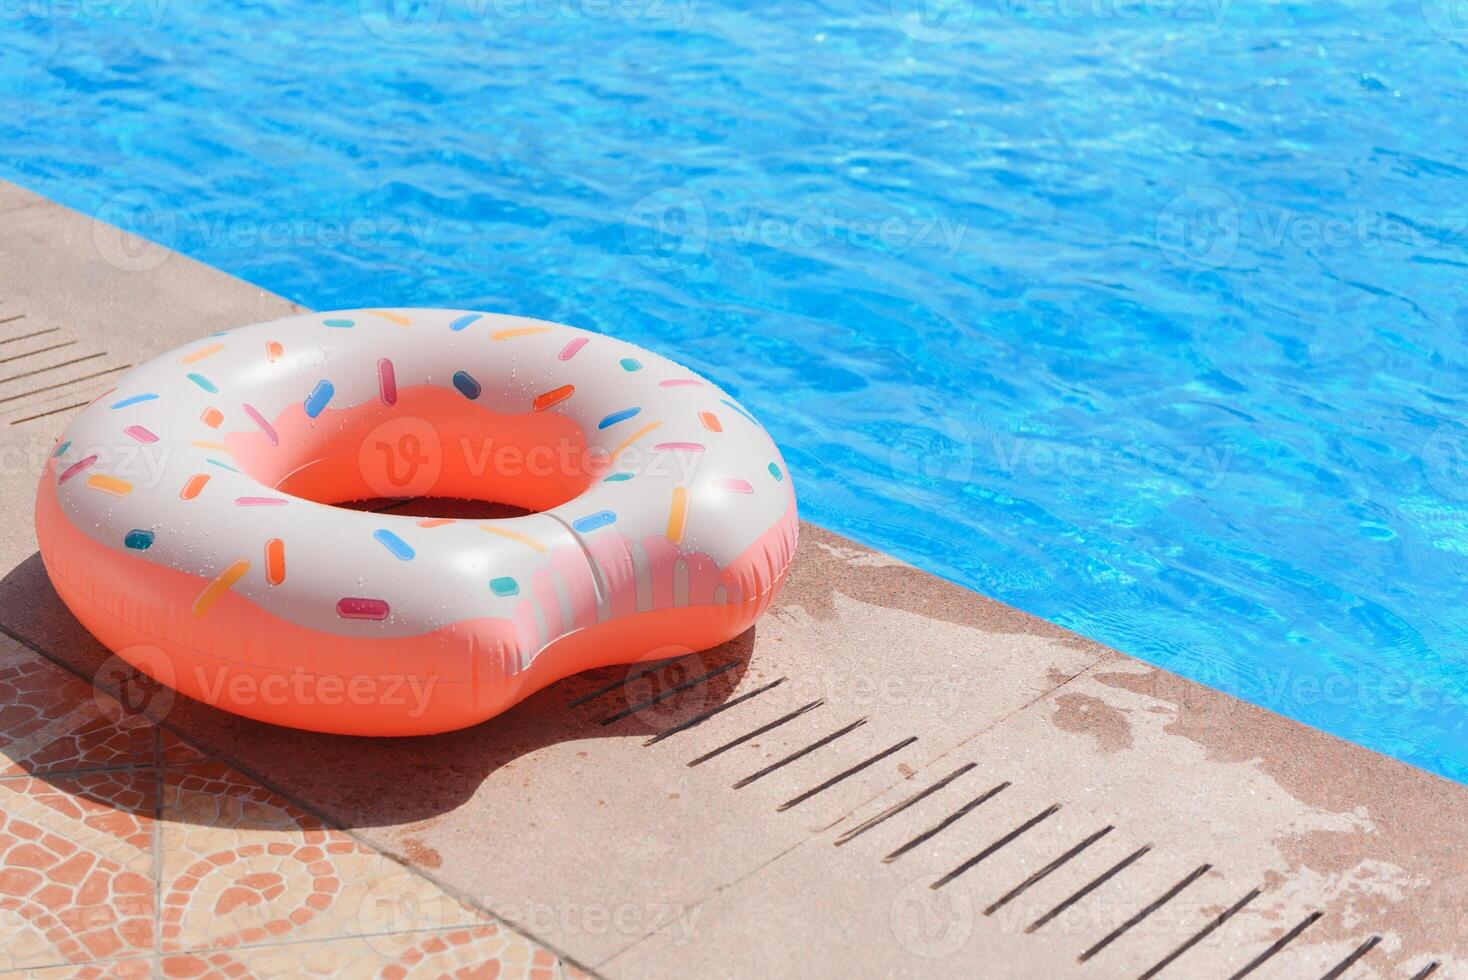 Inflatable swim ring in shape of donut floating in pool photo